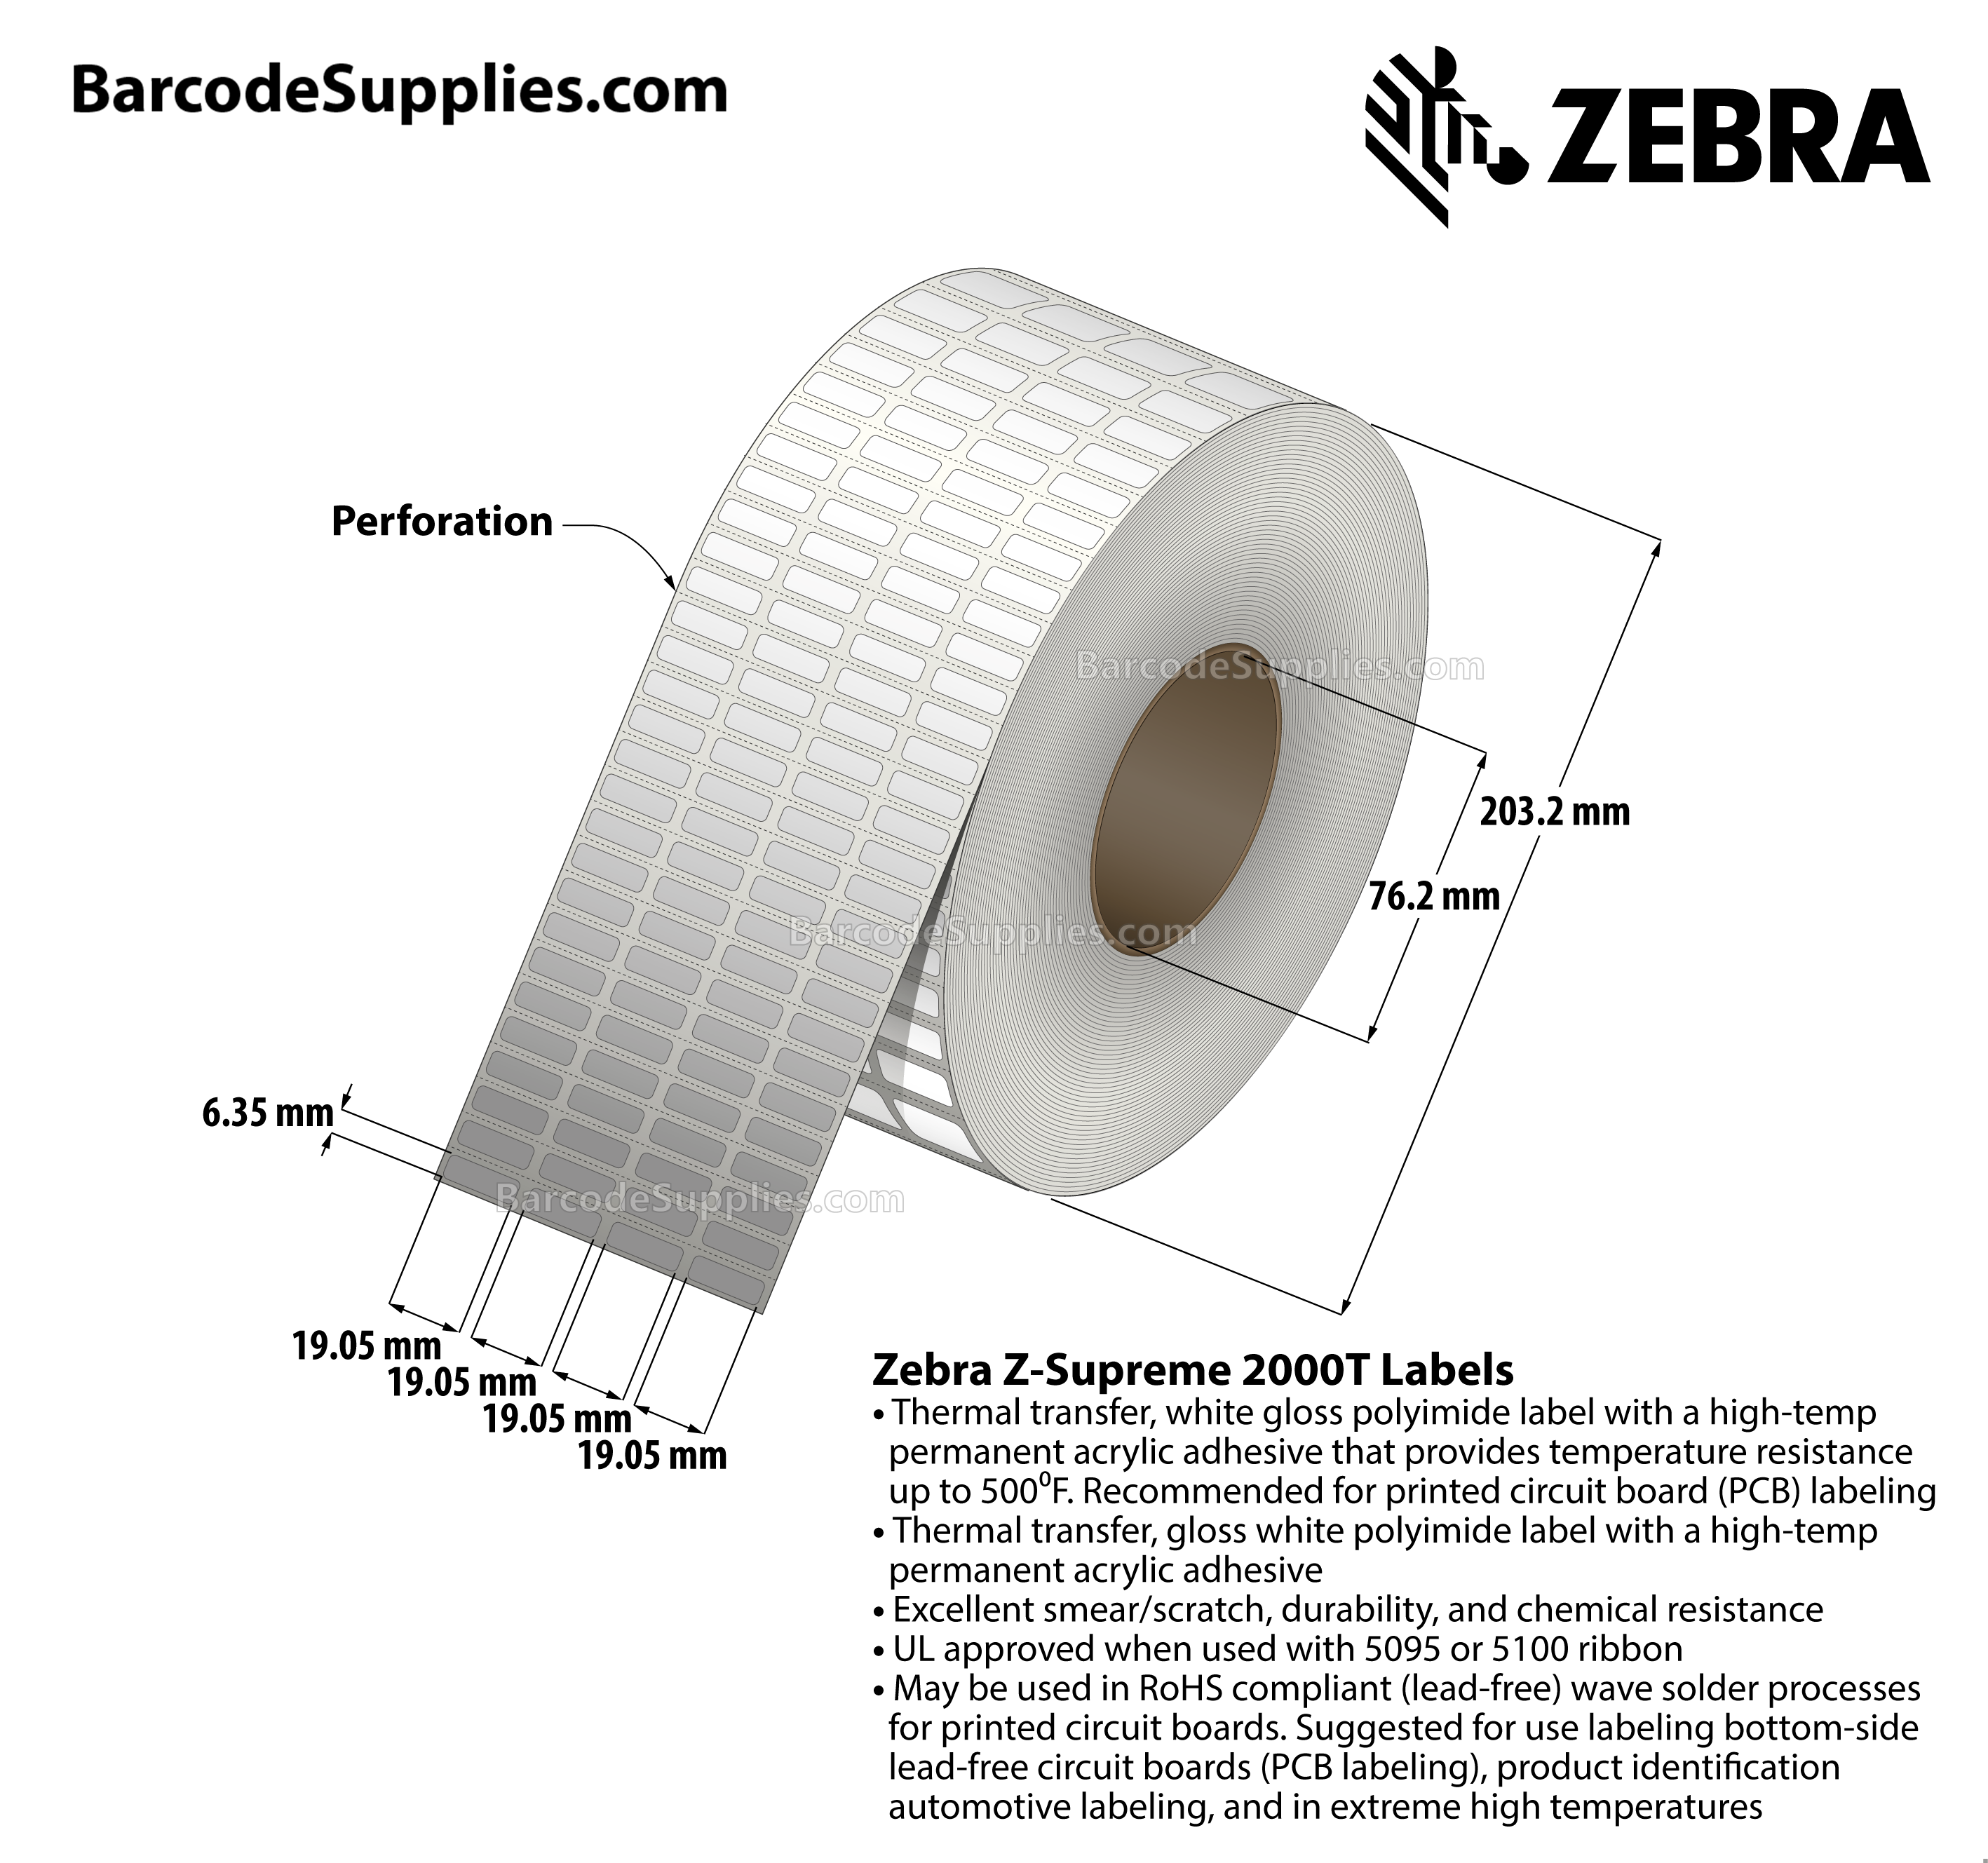 0.75 x 0.25 Thermal Transfer White Z-Supreme 2000T (4-Across) Labels With Permanent Adhesive - Perforated - 10000 Labels Per Roll - Carton Of 1 Rolls - 10000 Labels Total - MPN: 10023193